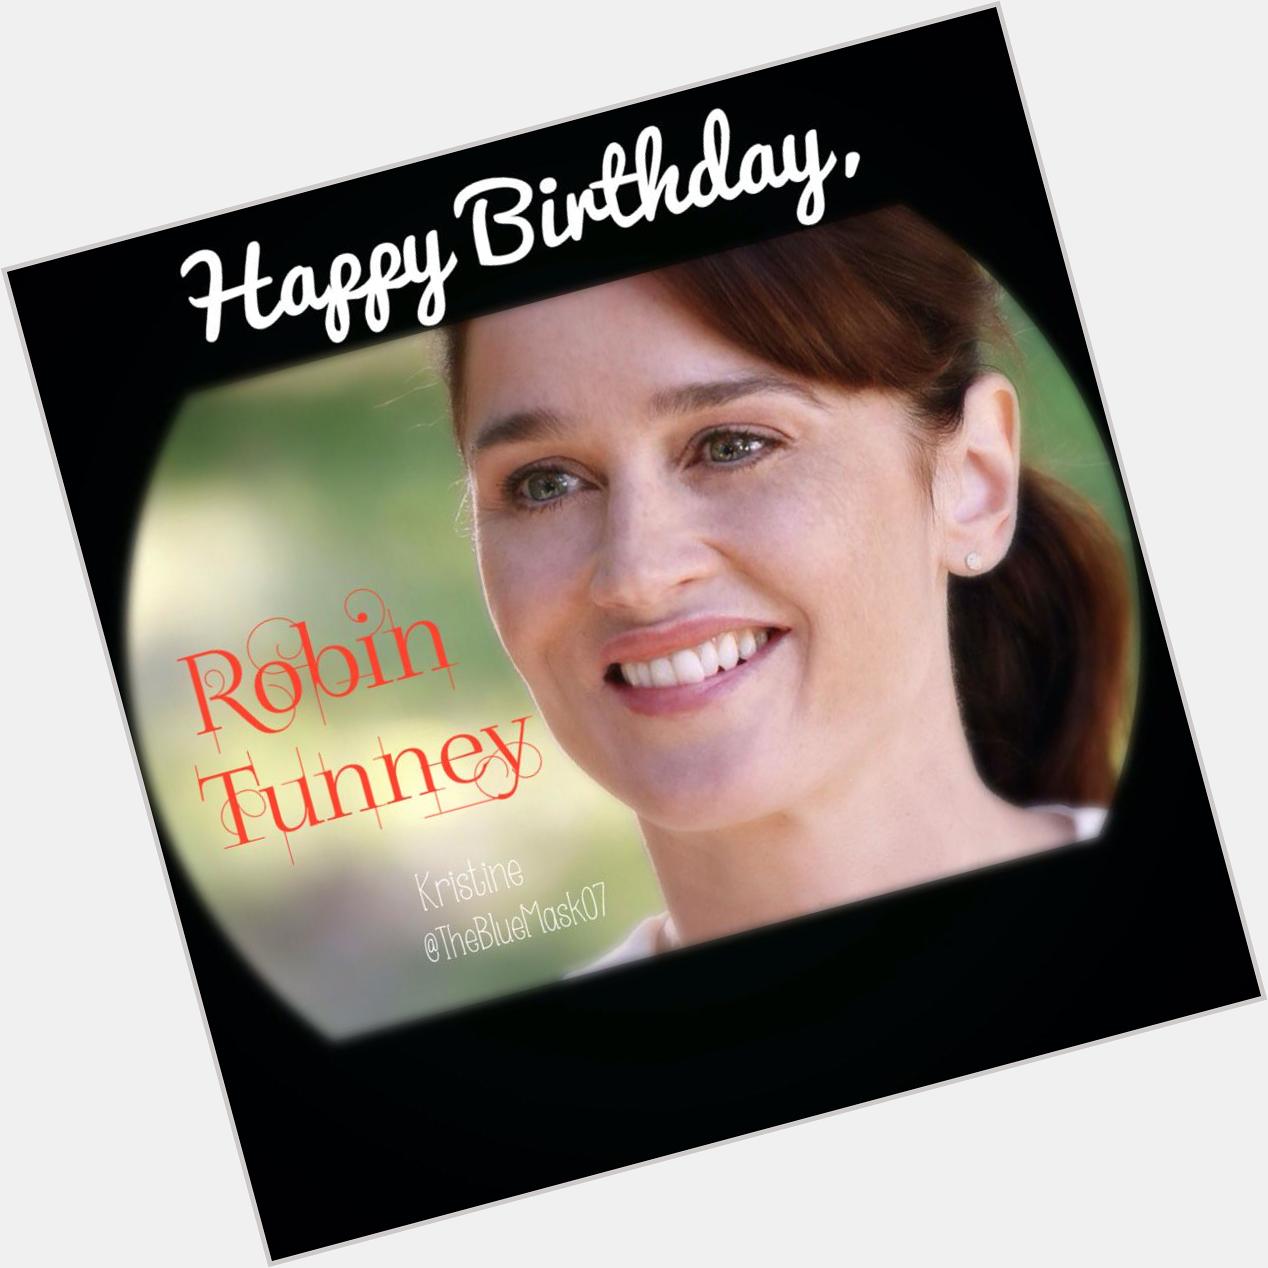 Happy Birthday Robin Tunney! I hope you\ll have a wonderful one! I love you and God bless you always! 